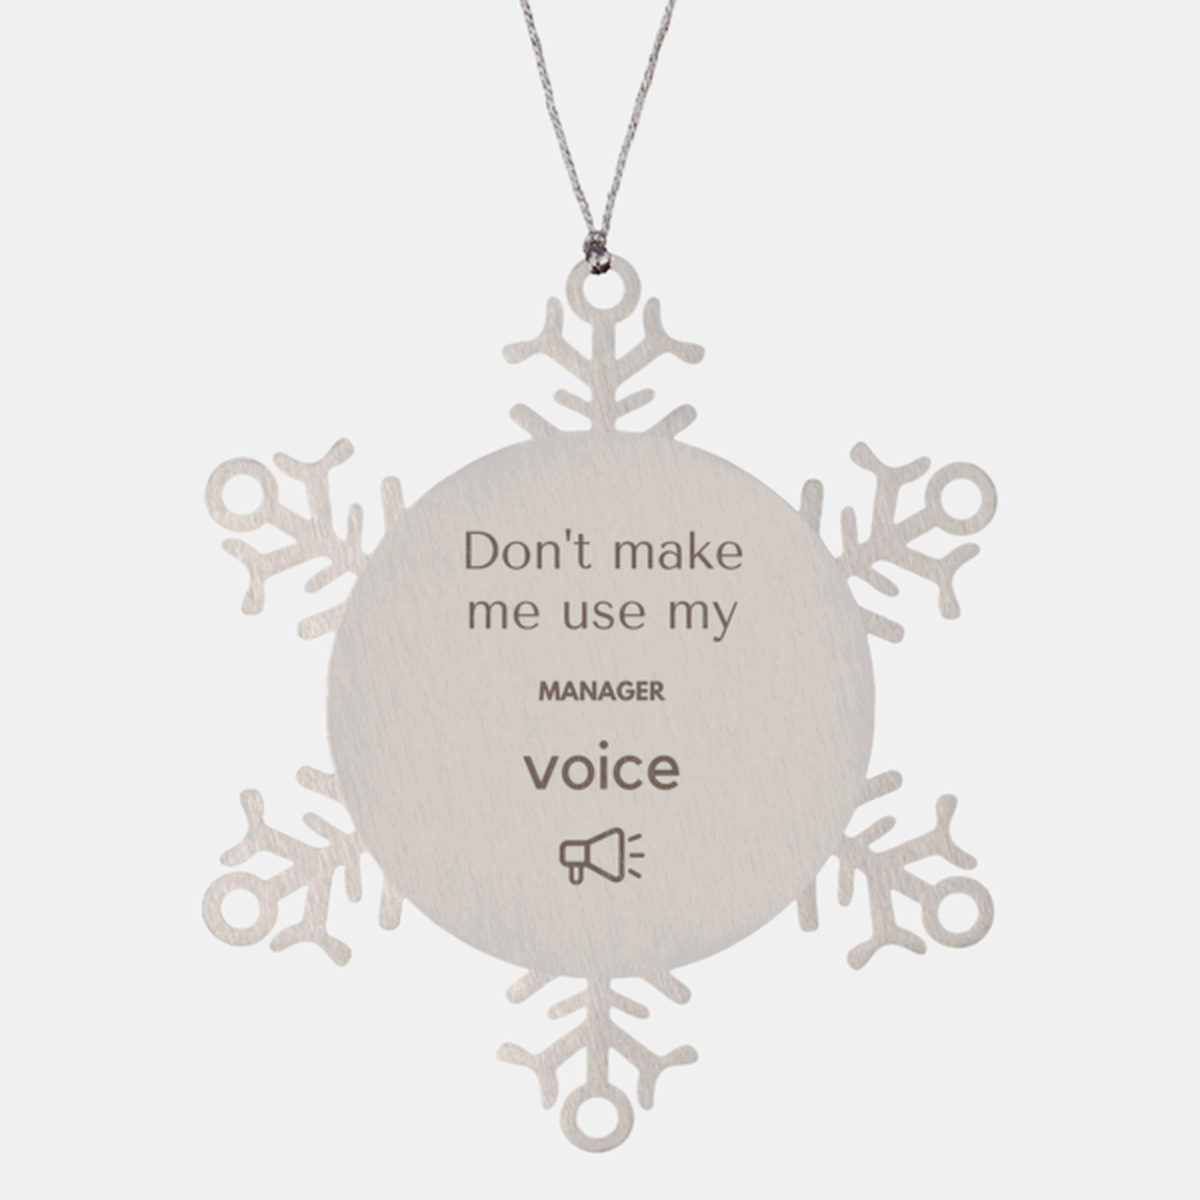 Don't make me use my Manager voice, Sarcasm Manager Ornament Gifts, Christmas Manager Snowflake Ornament Unique Gifts For Manager Coworkers, Men, Women, Colleague, Friends